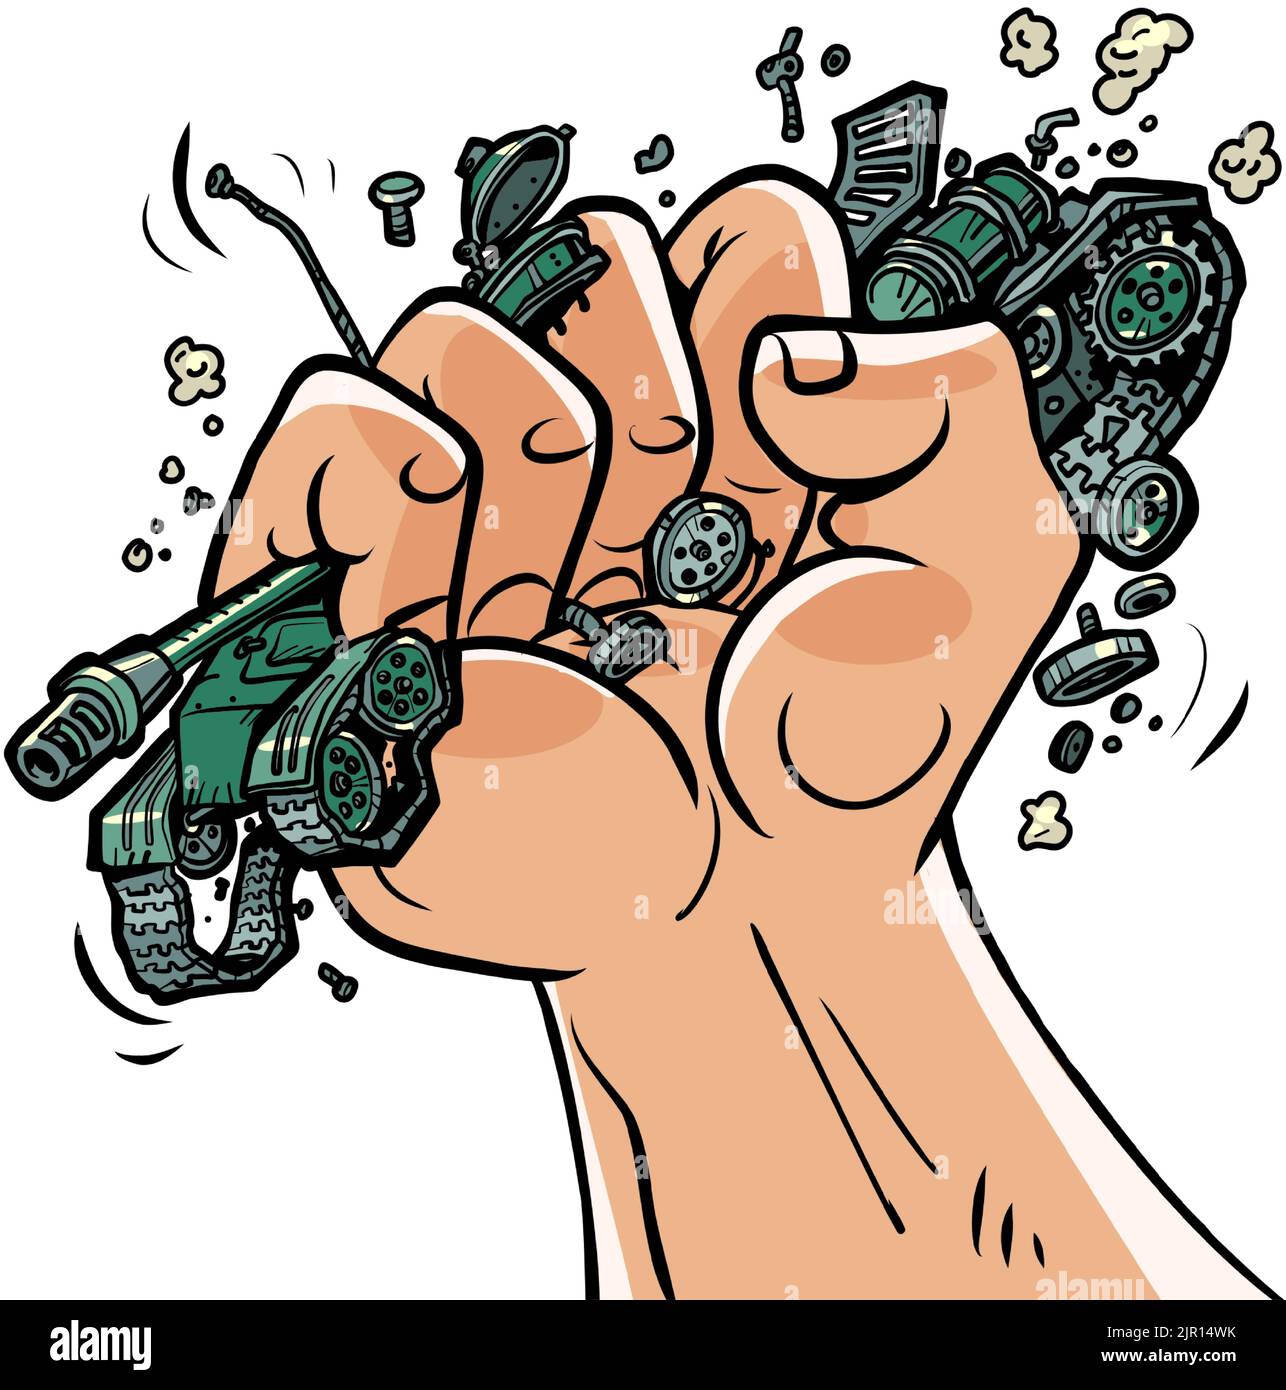 Pacifism. Protest against the war. Fist squeezes military equipment. Rage against Militarism. Comic cartoon hand illustration retro style Stock Vector